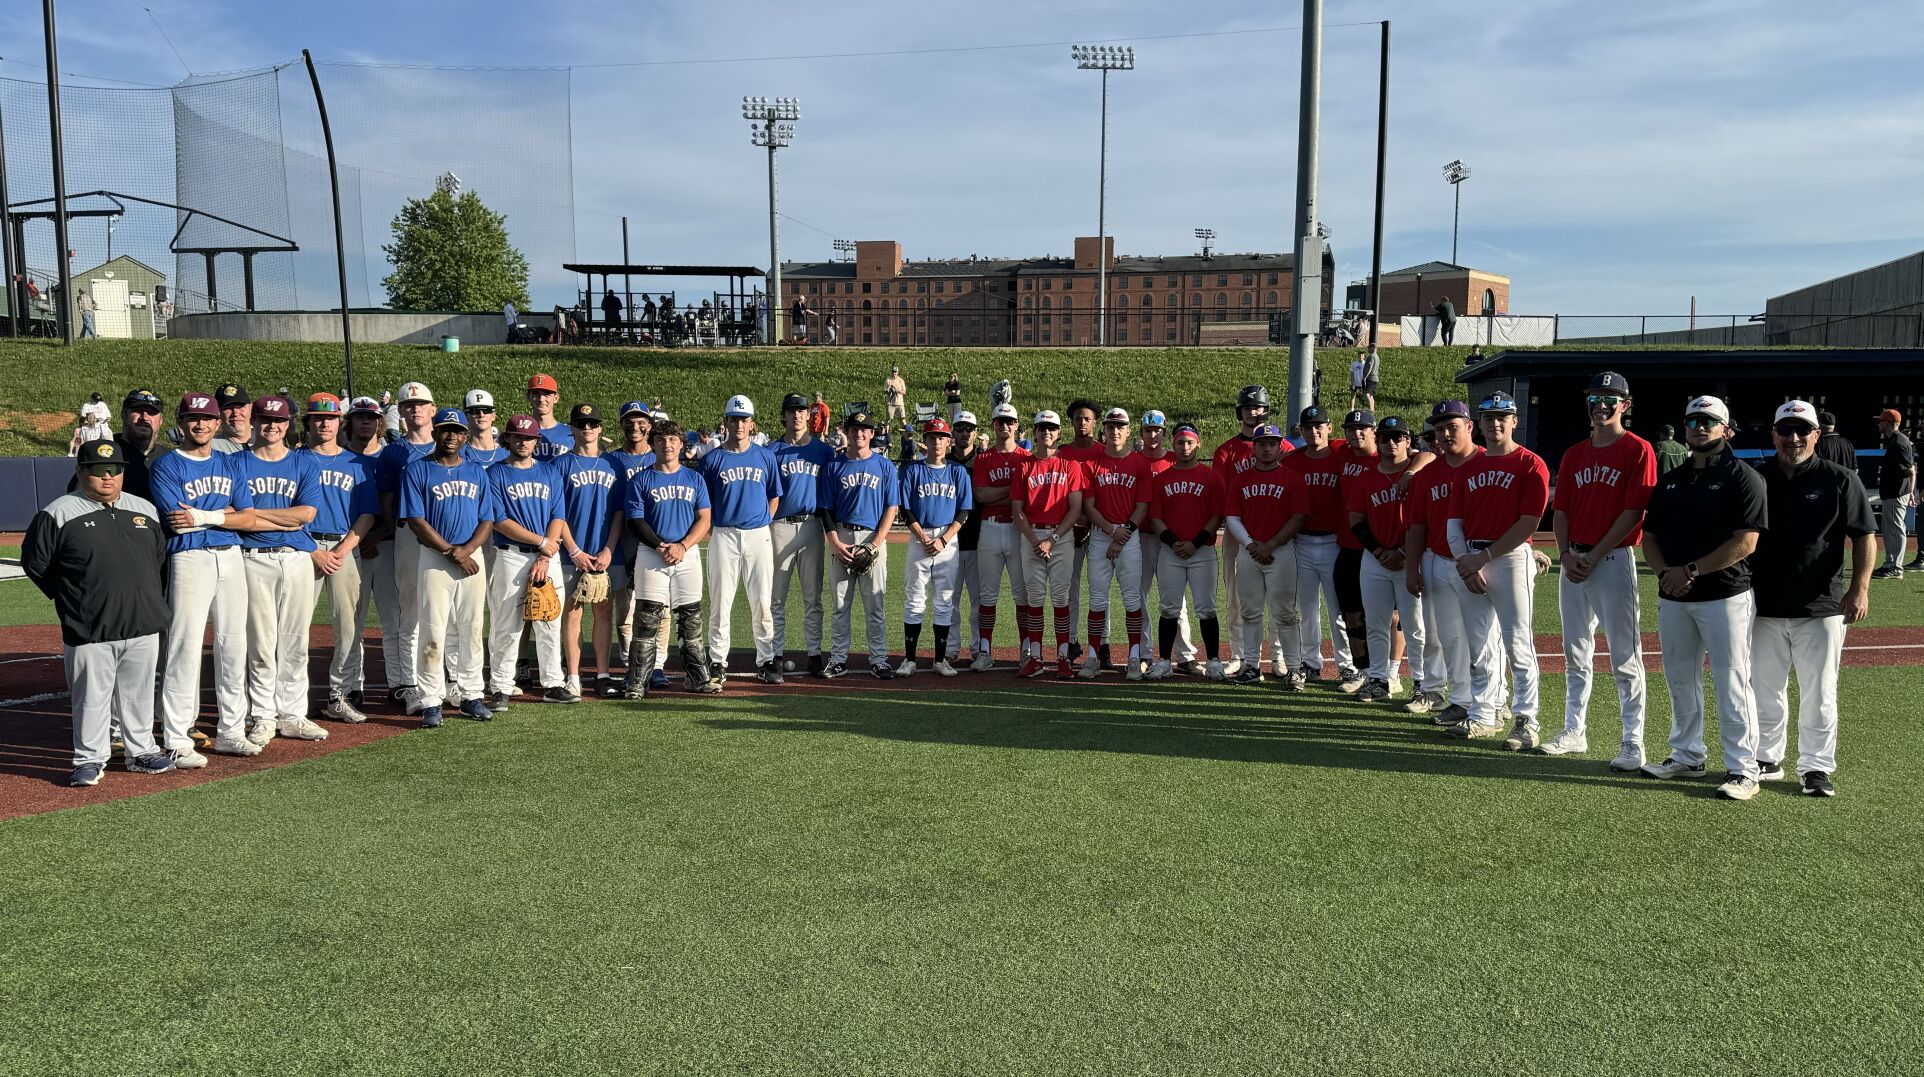 South defeats North in UCBAC All-Star Game